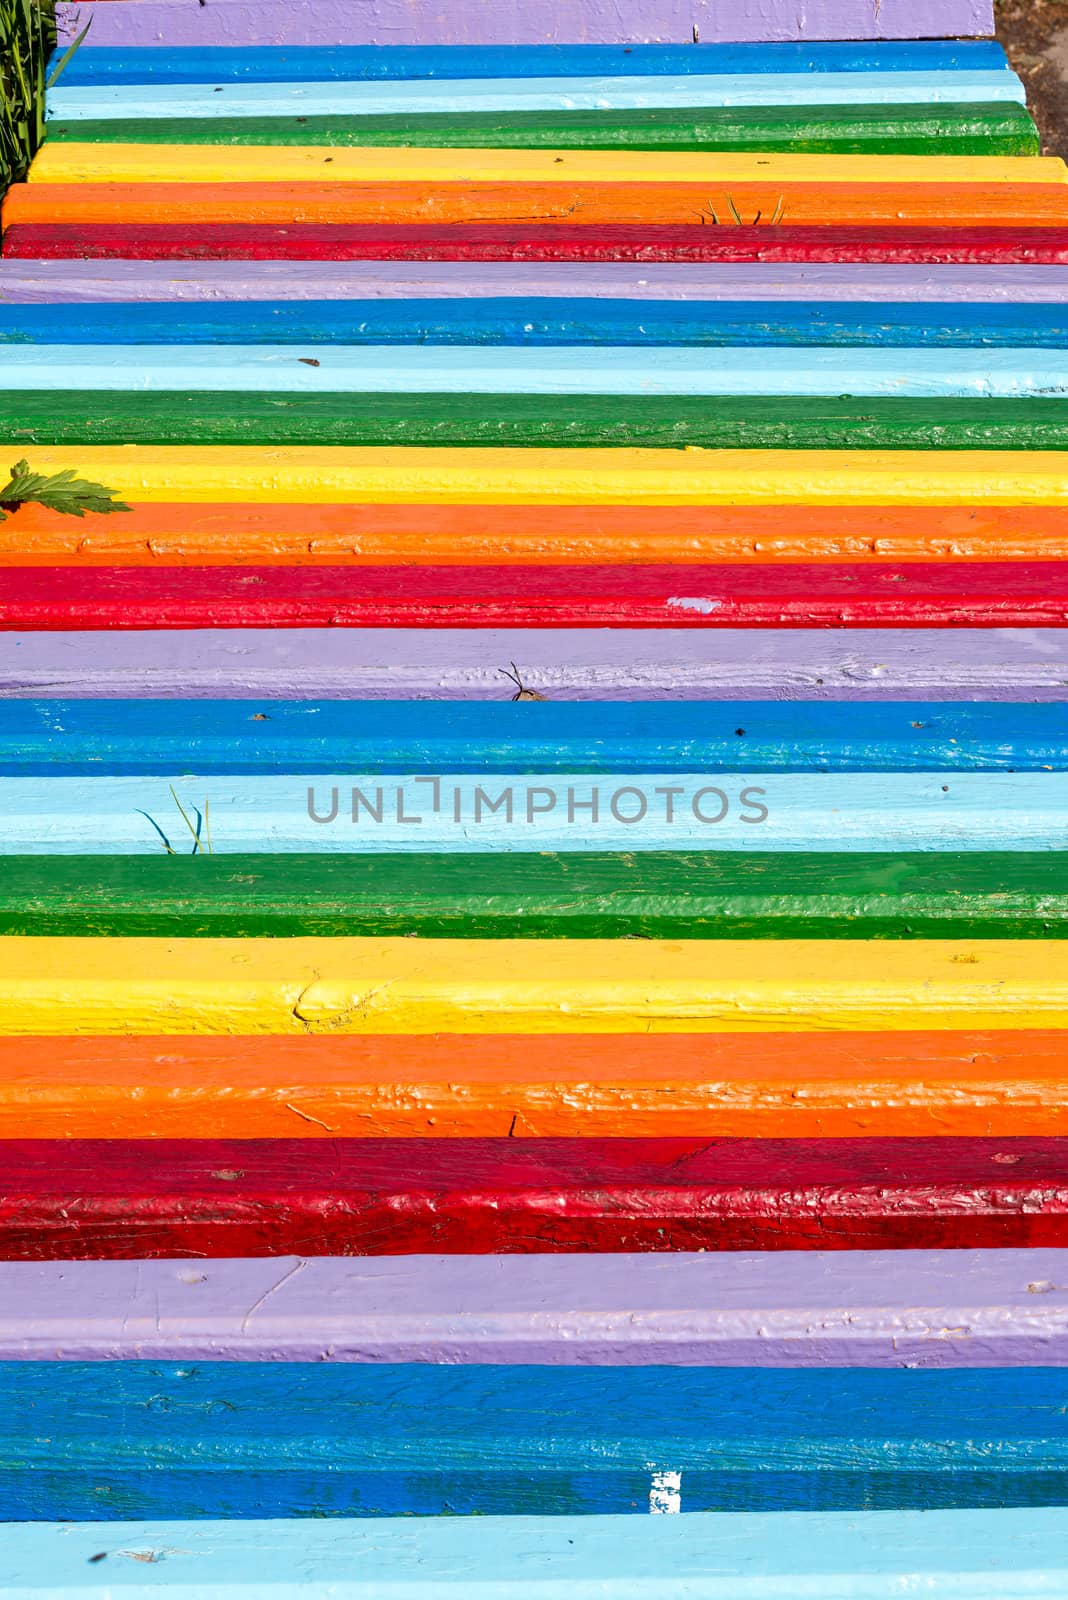 A multicolored wooden bench in the park